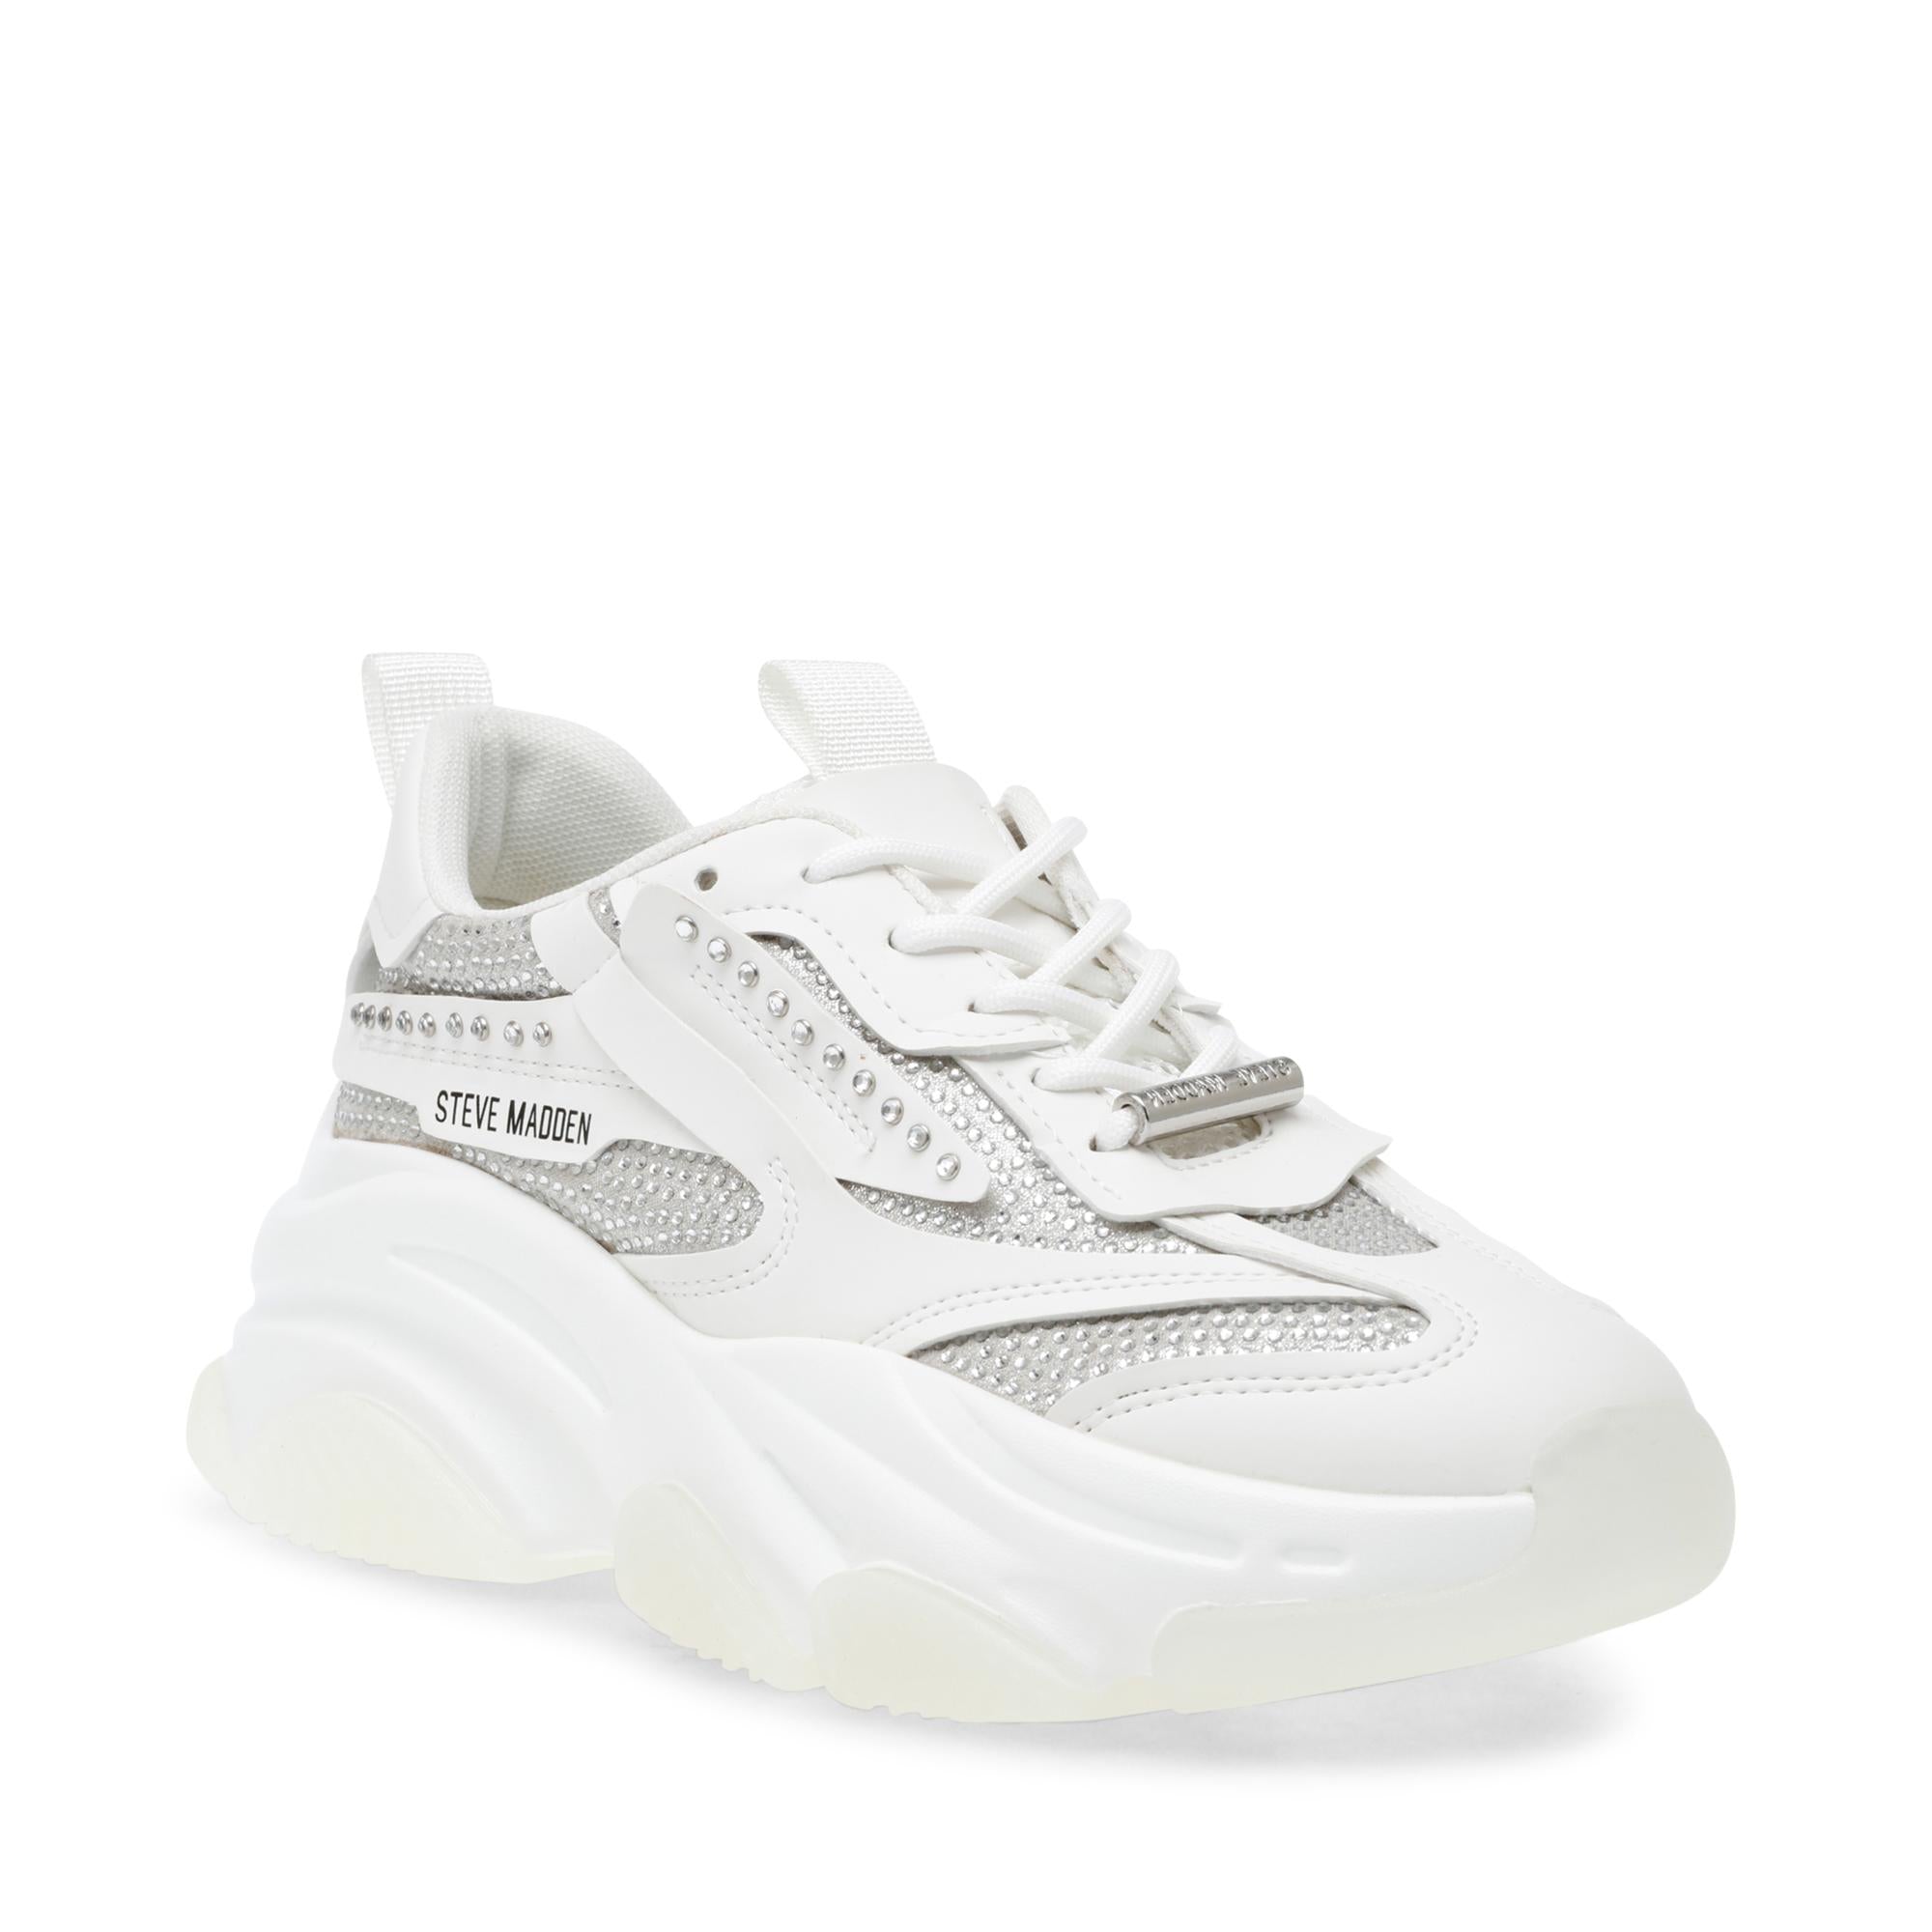 POSSESSION-R WHITE SNEAKER SHOES- Hover Image